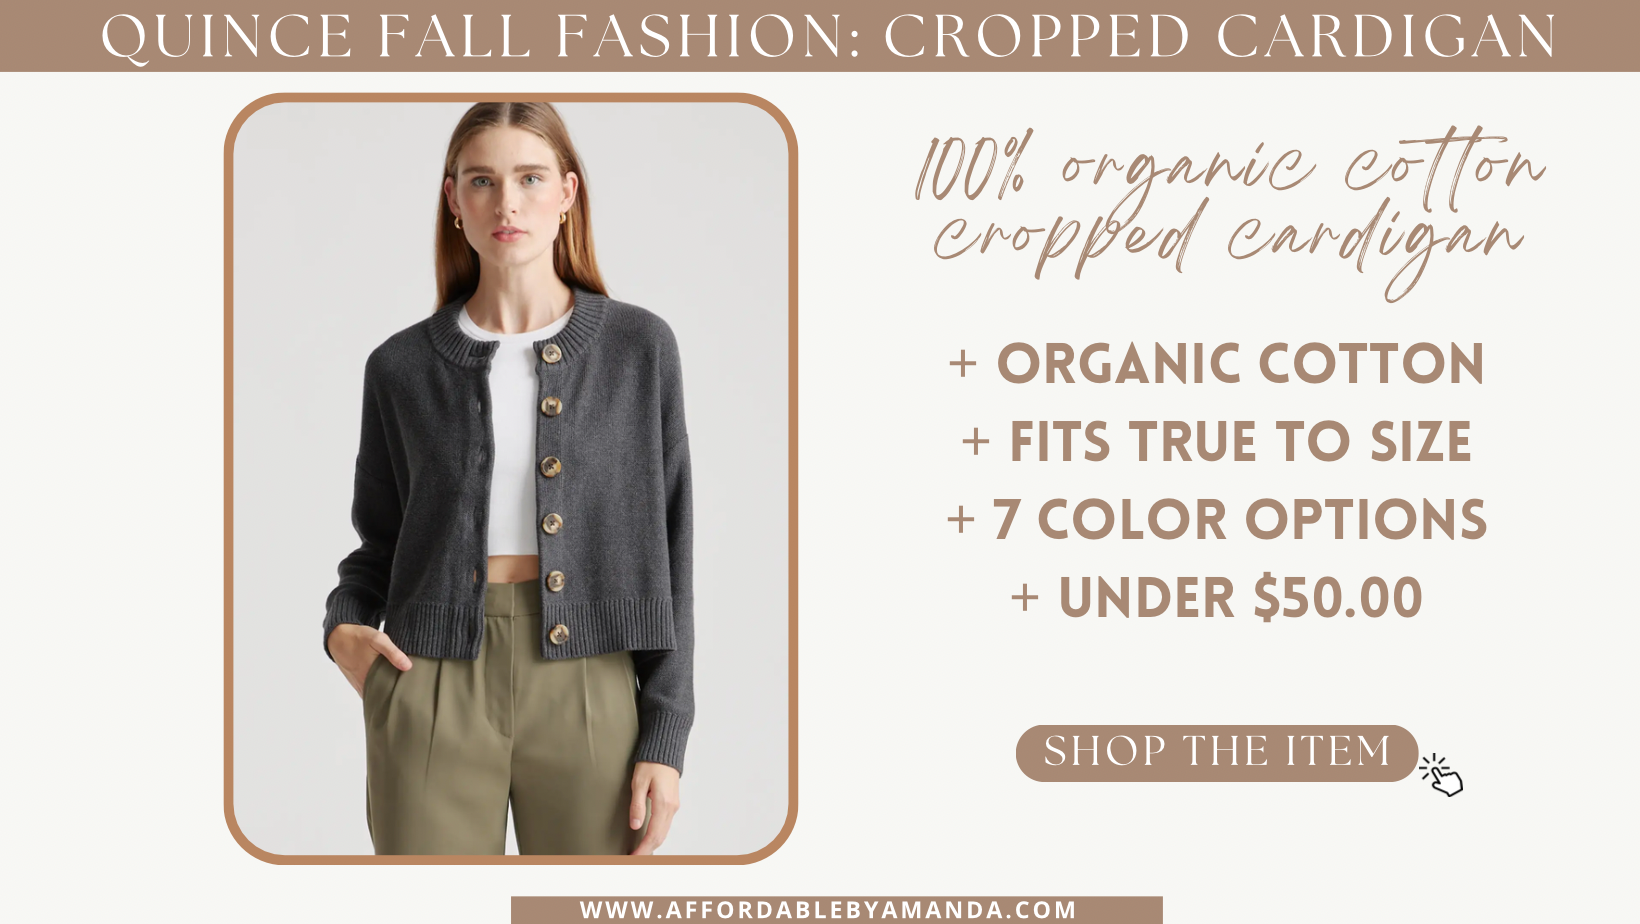 100% Organic Cotton Cropped Cardigan - Quince Fall Fashion Finds